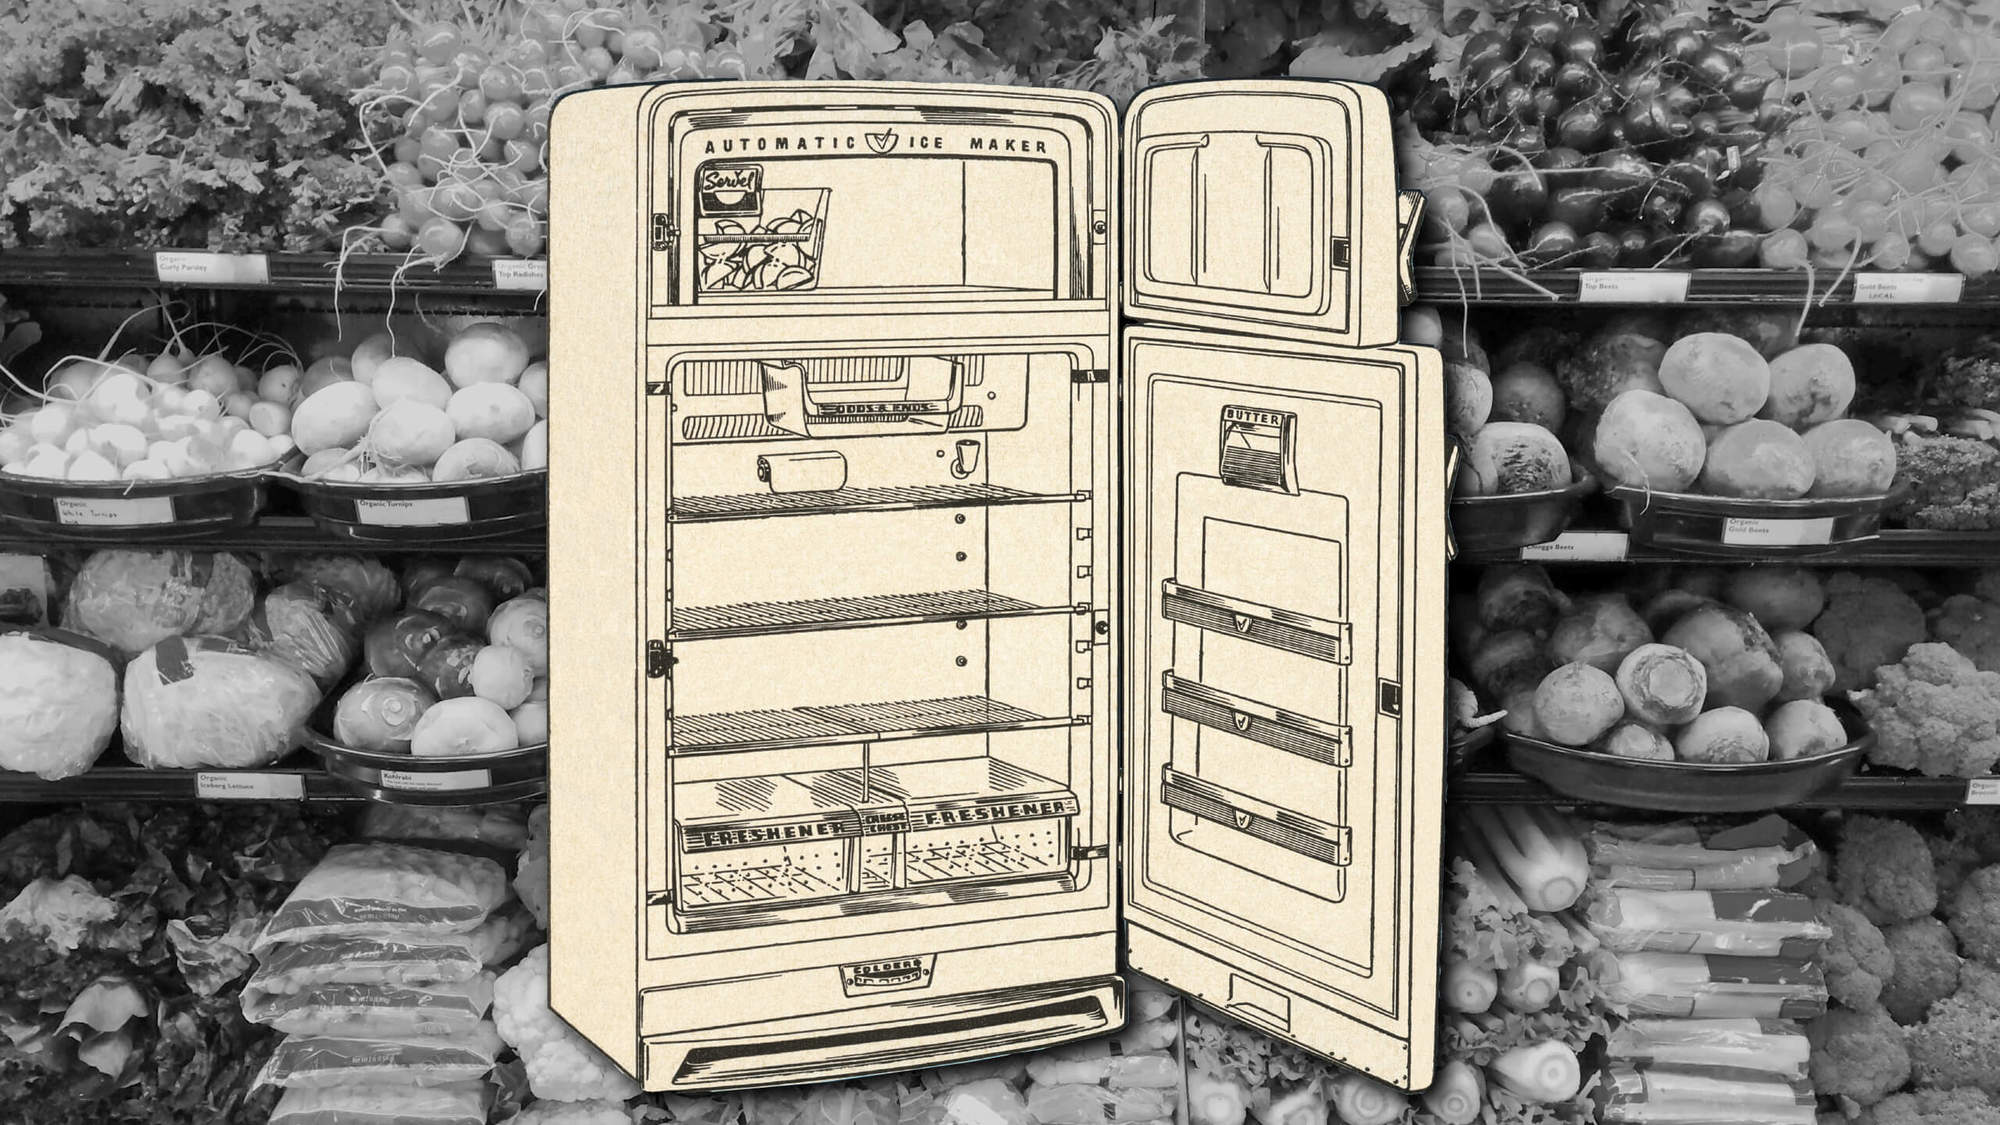 Illustration of an empty fridge in front of a black and white photo of a stocked produce aisle. December 2020